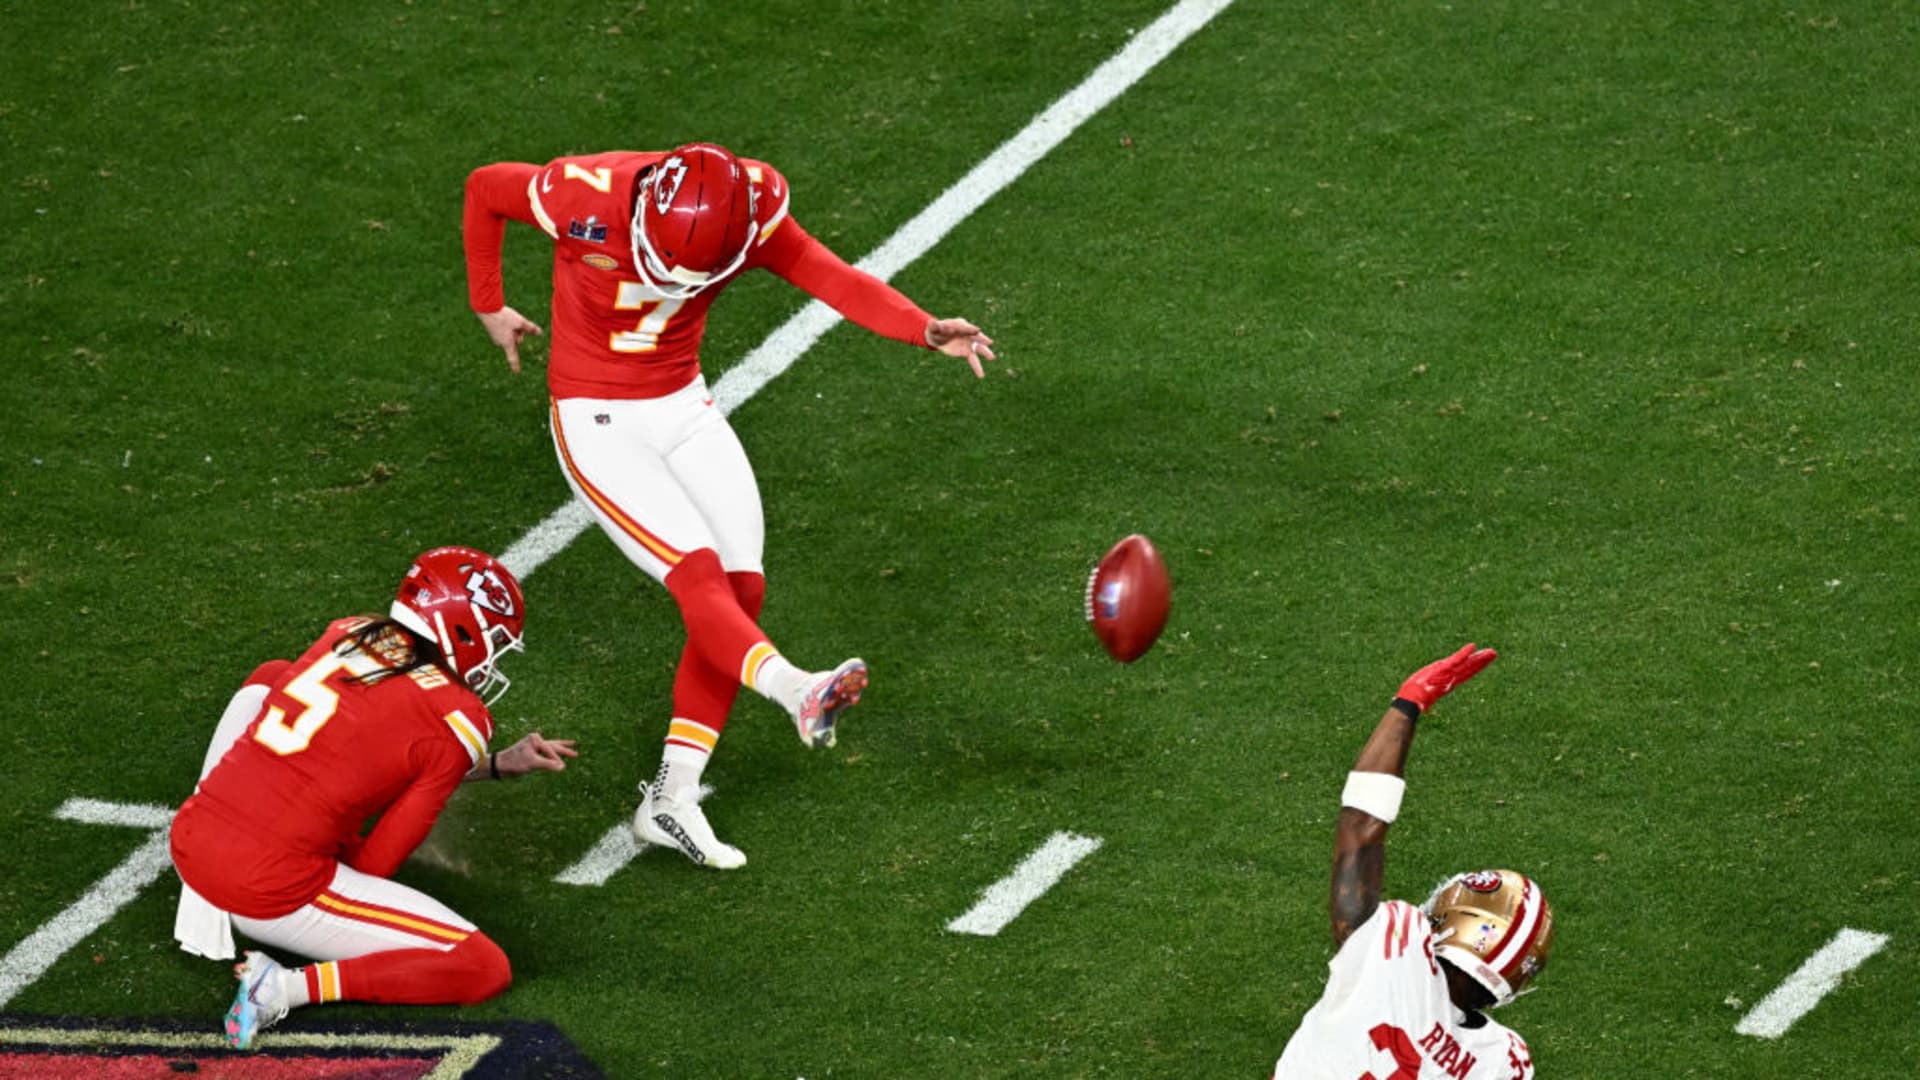 Kansas City Chiefs' kicker #07 Harrison Butker ties and sends the game to overtime during Super Bowl LVIII between the Kansas City Chiefs and the San Francisco 49ers at Allegiant Stadium in Las Vegas, Nevada, February 11, 2024. 